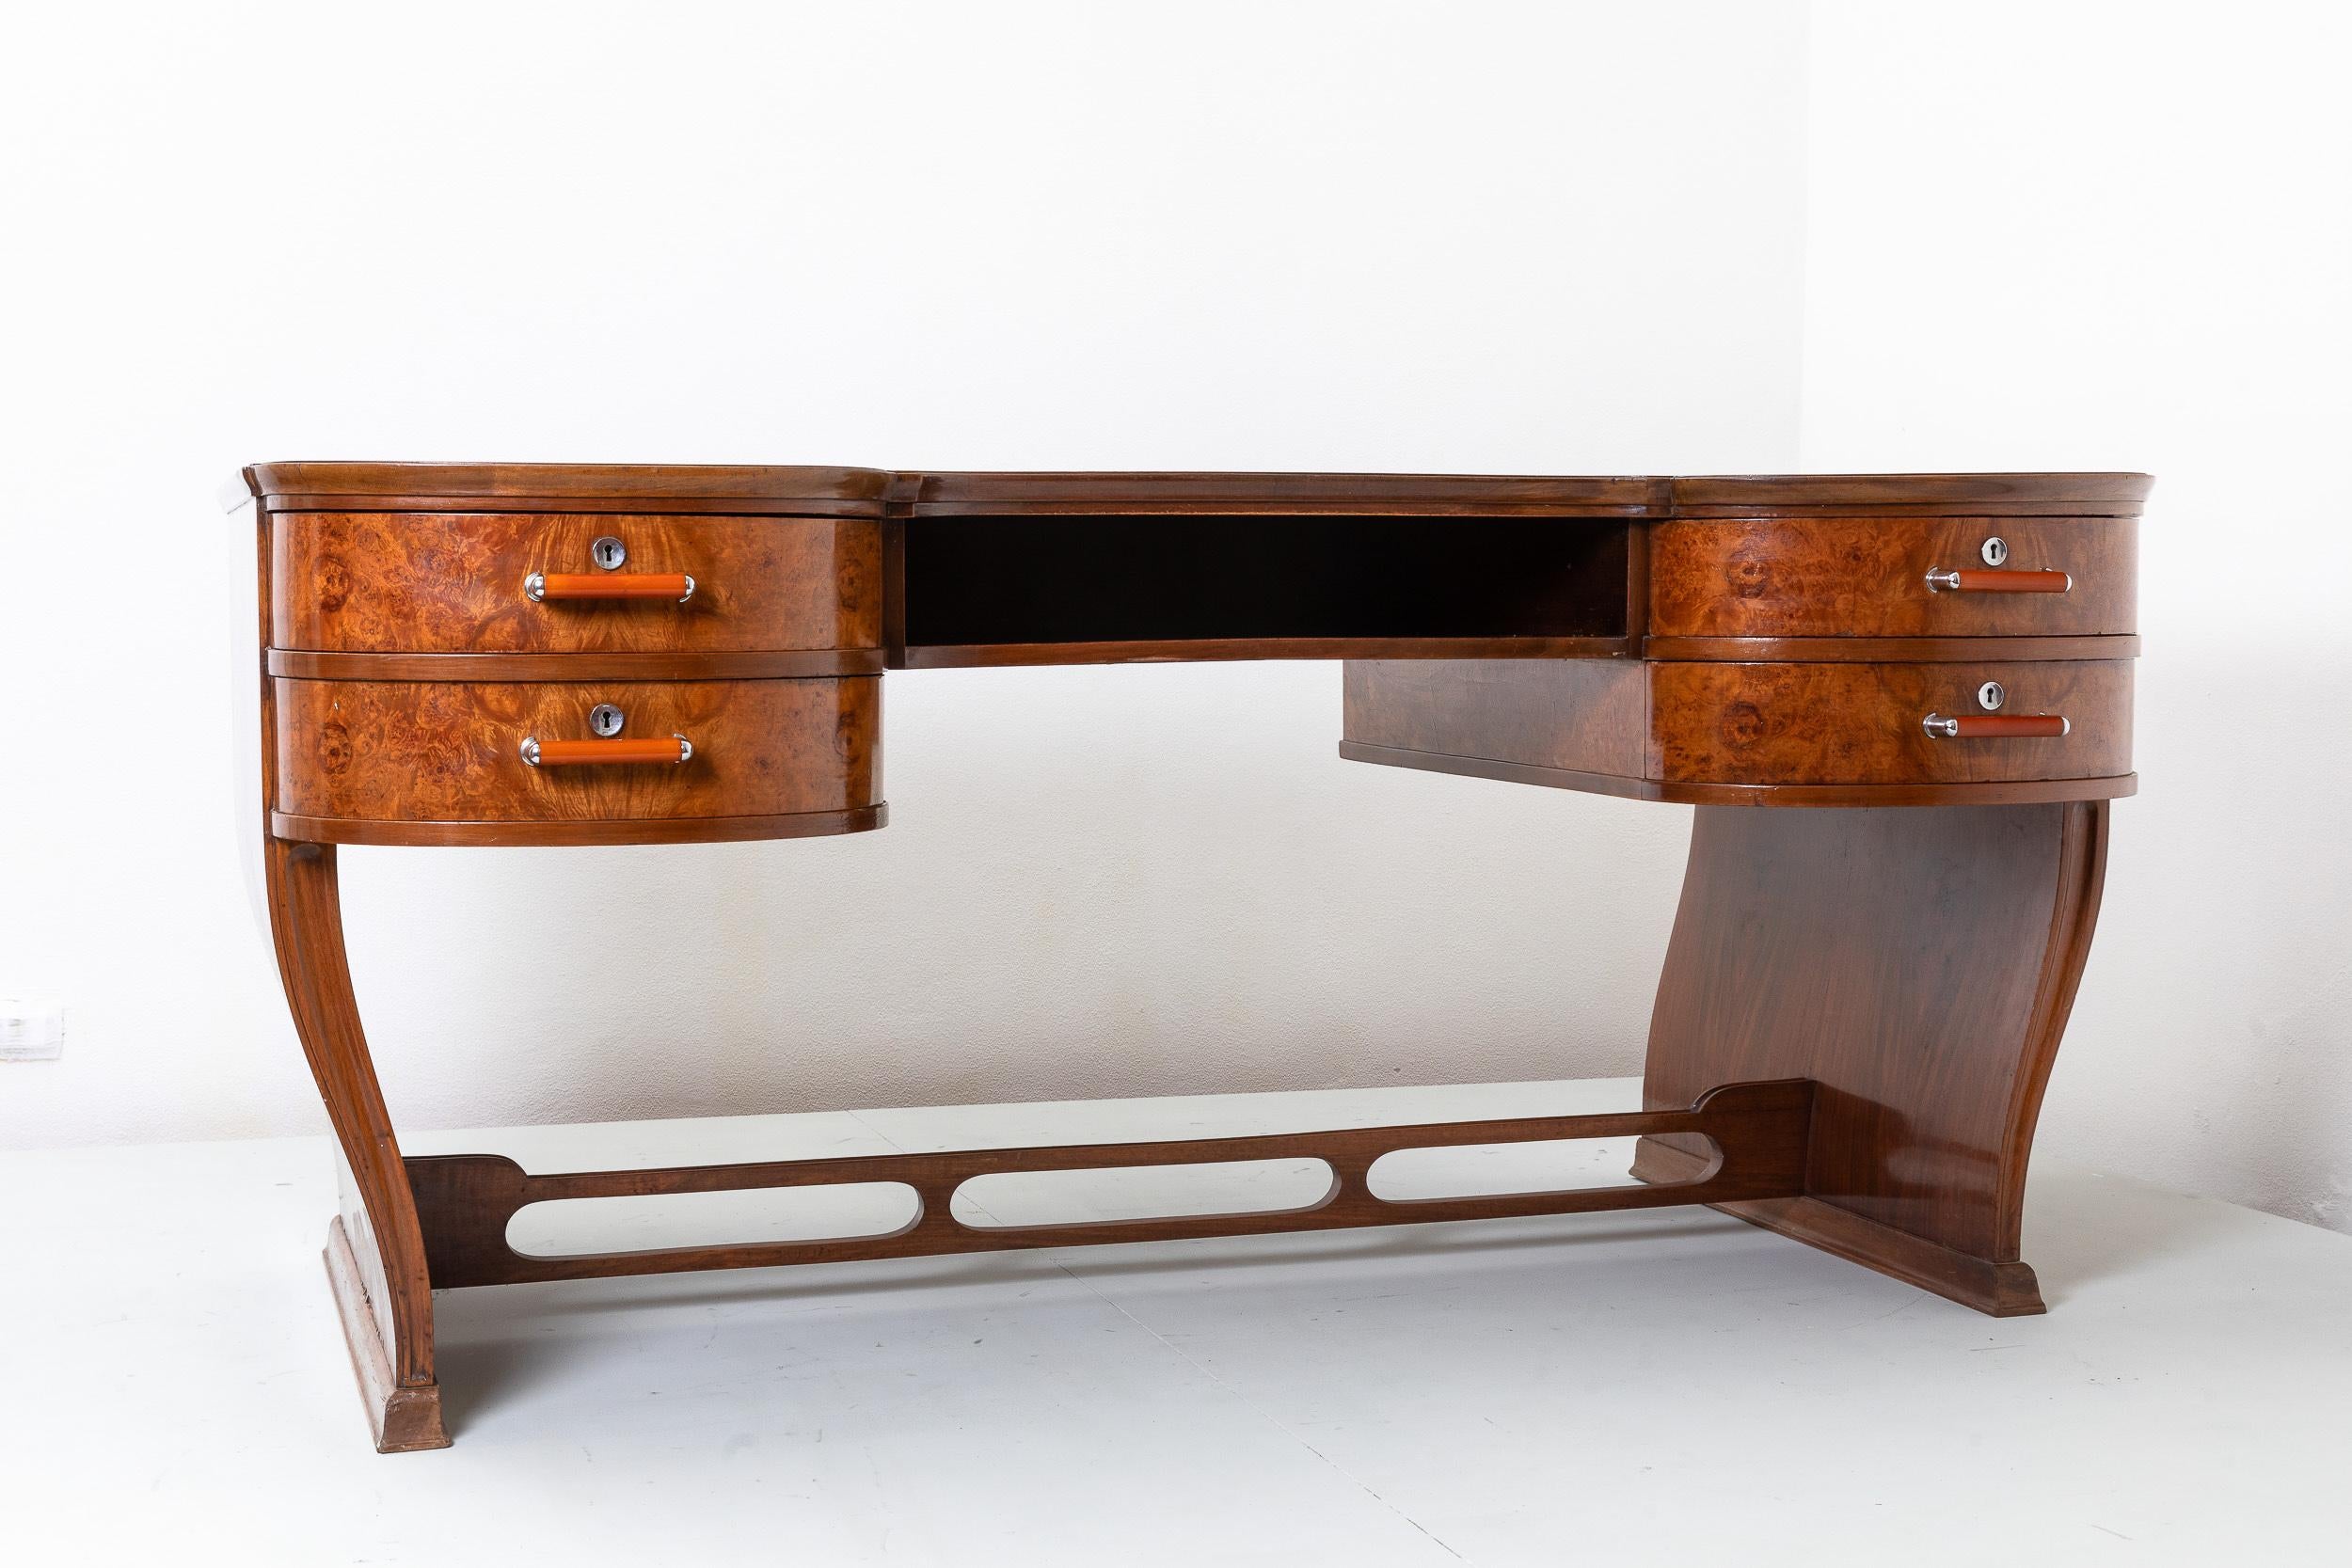 Prod. Italy, c. 1930 Deco desk with curvilinear forms  For Sale 3